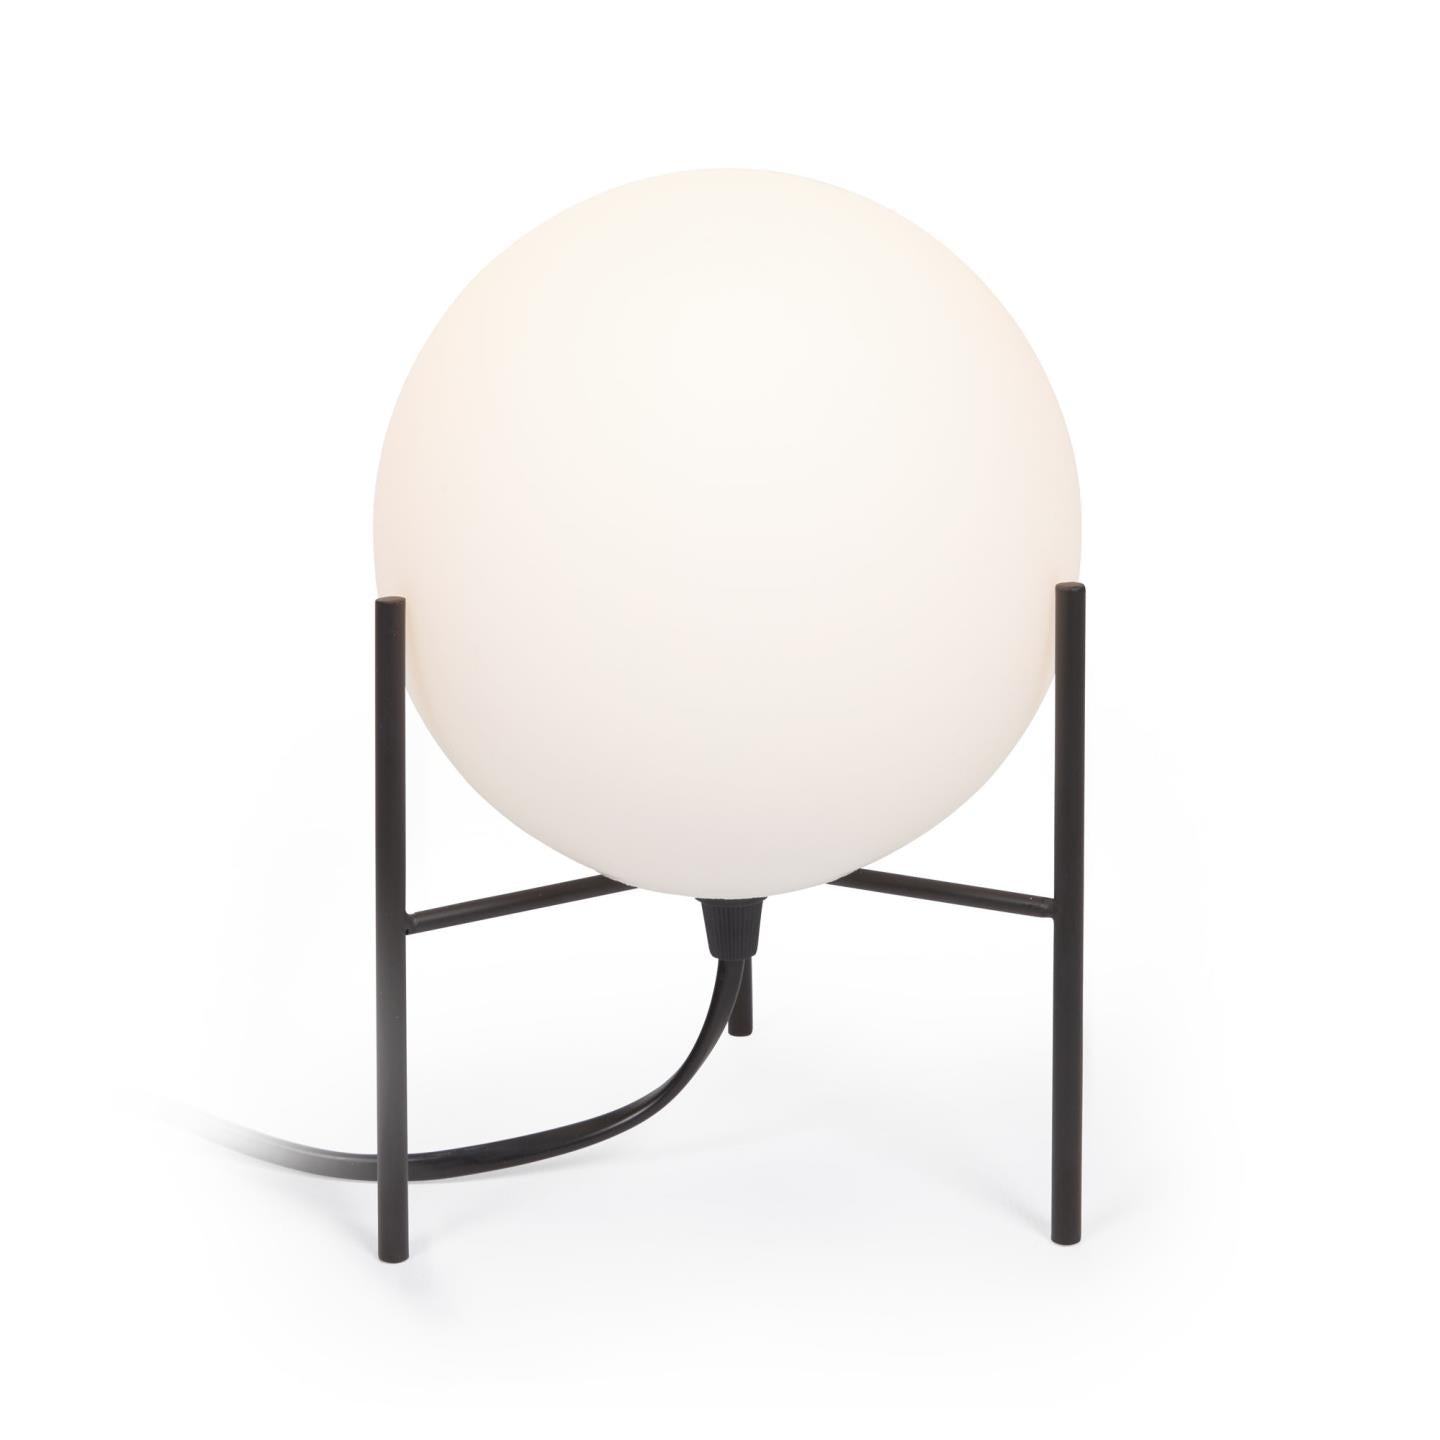 Seina table lamp in steel with black finish